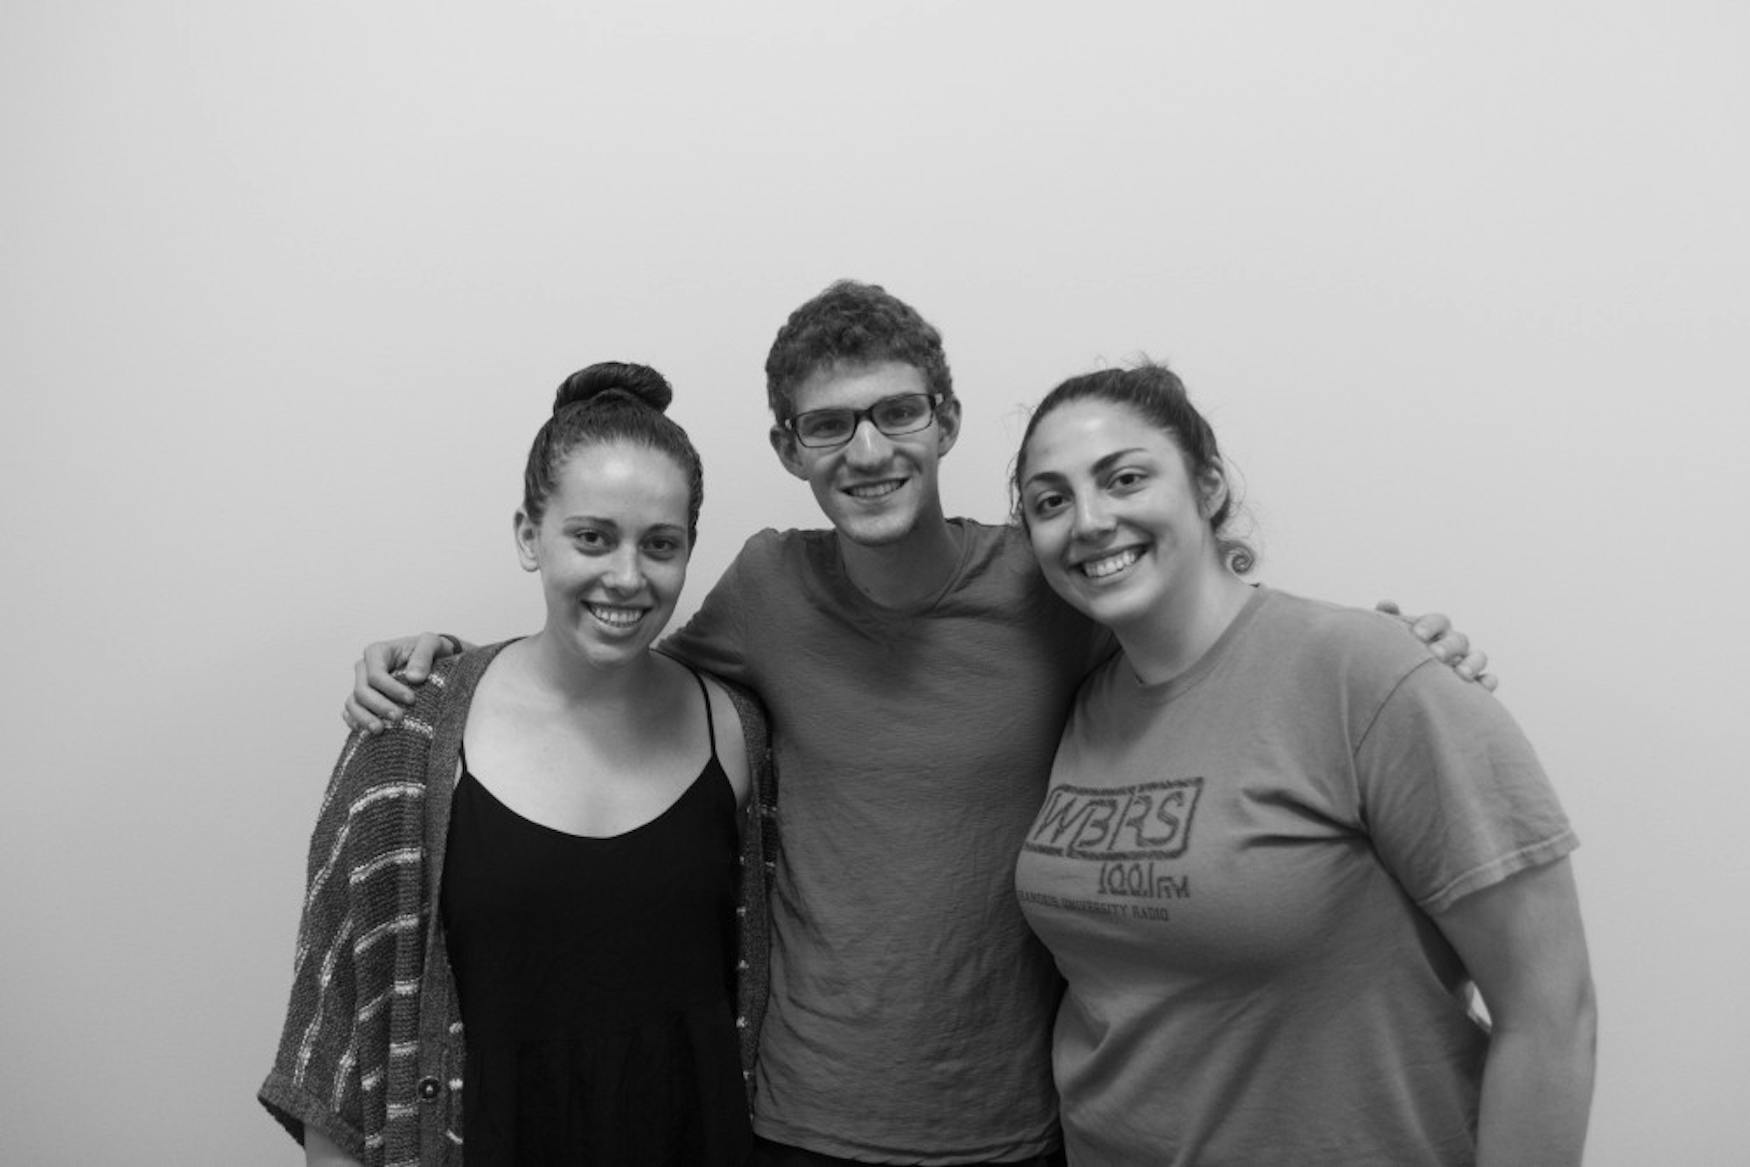 NEVER GROWING UP: The directors of “Peter Pan” (Carley Chase ’16, left, Zach Marlin ’16, middle, and Zoe Golub-Sass ’16) reflect on their last 24 hour musical at Brandeis.